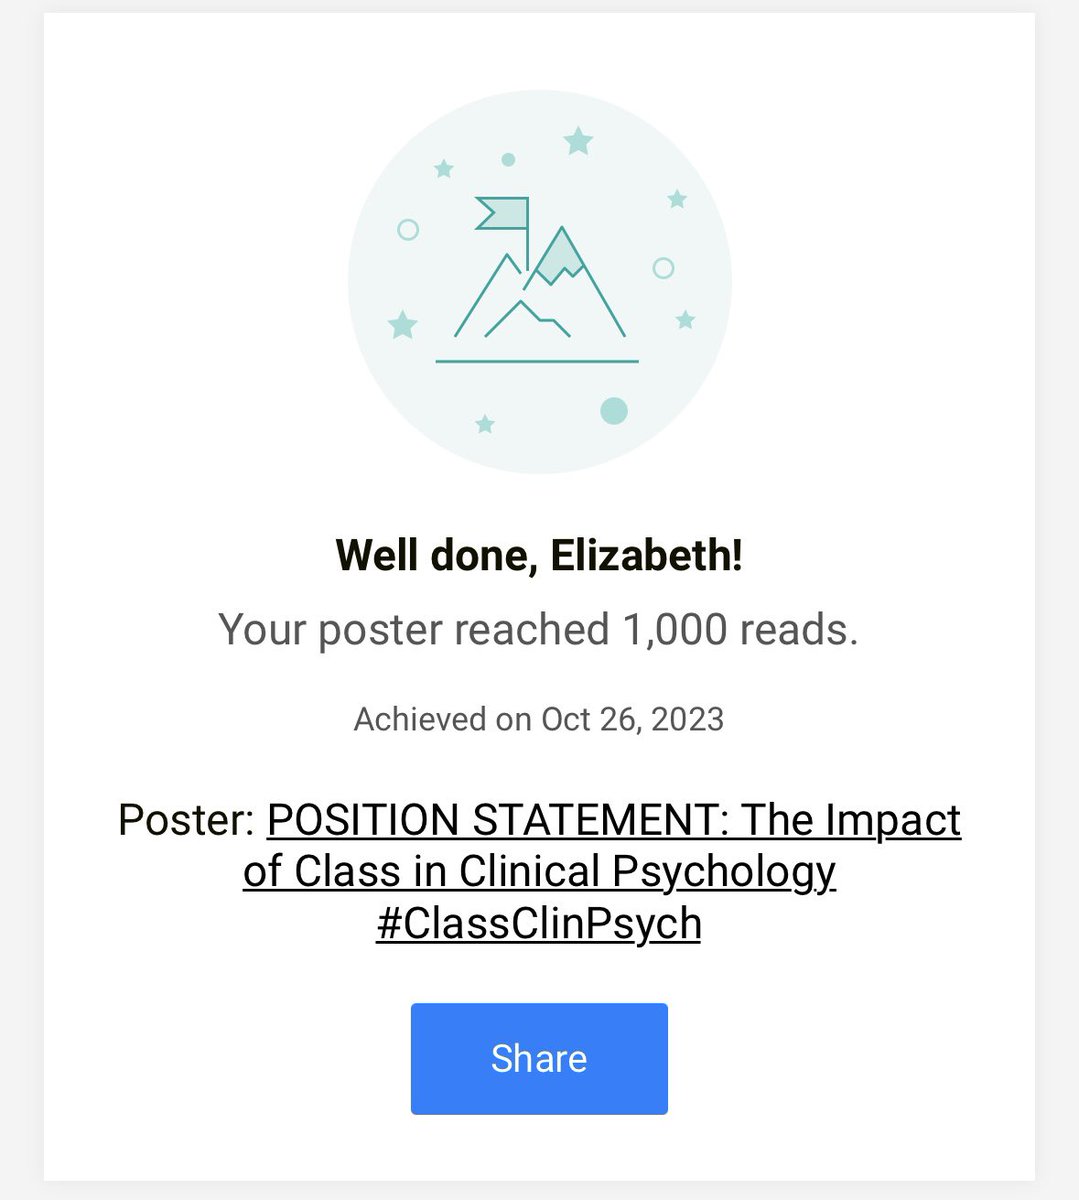 Almost exactly 2.5yrs later and the original @ClassClin Position Statement has been read over 1000 times 😳. Unreal how much has been done since putting it out and the amazing work that continues with #ClassClinPsych Collective. @celinejbs @WillCurvis @SarahStLedger